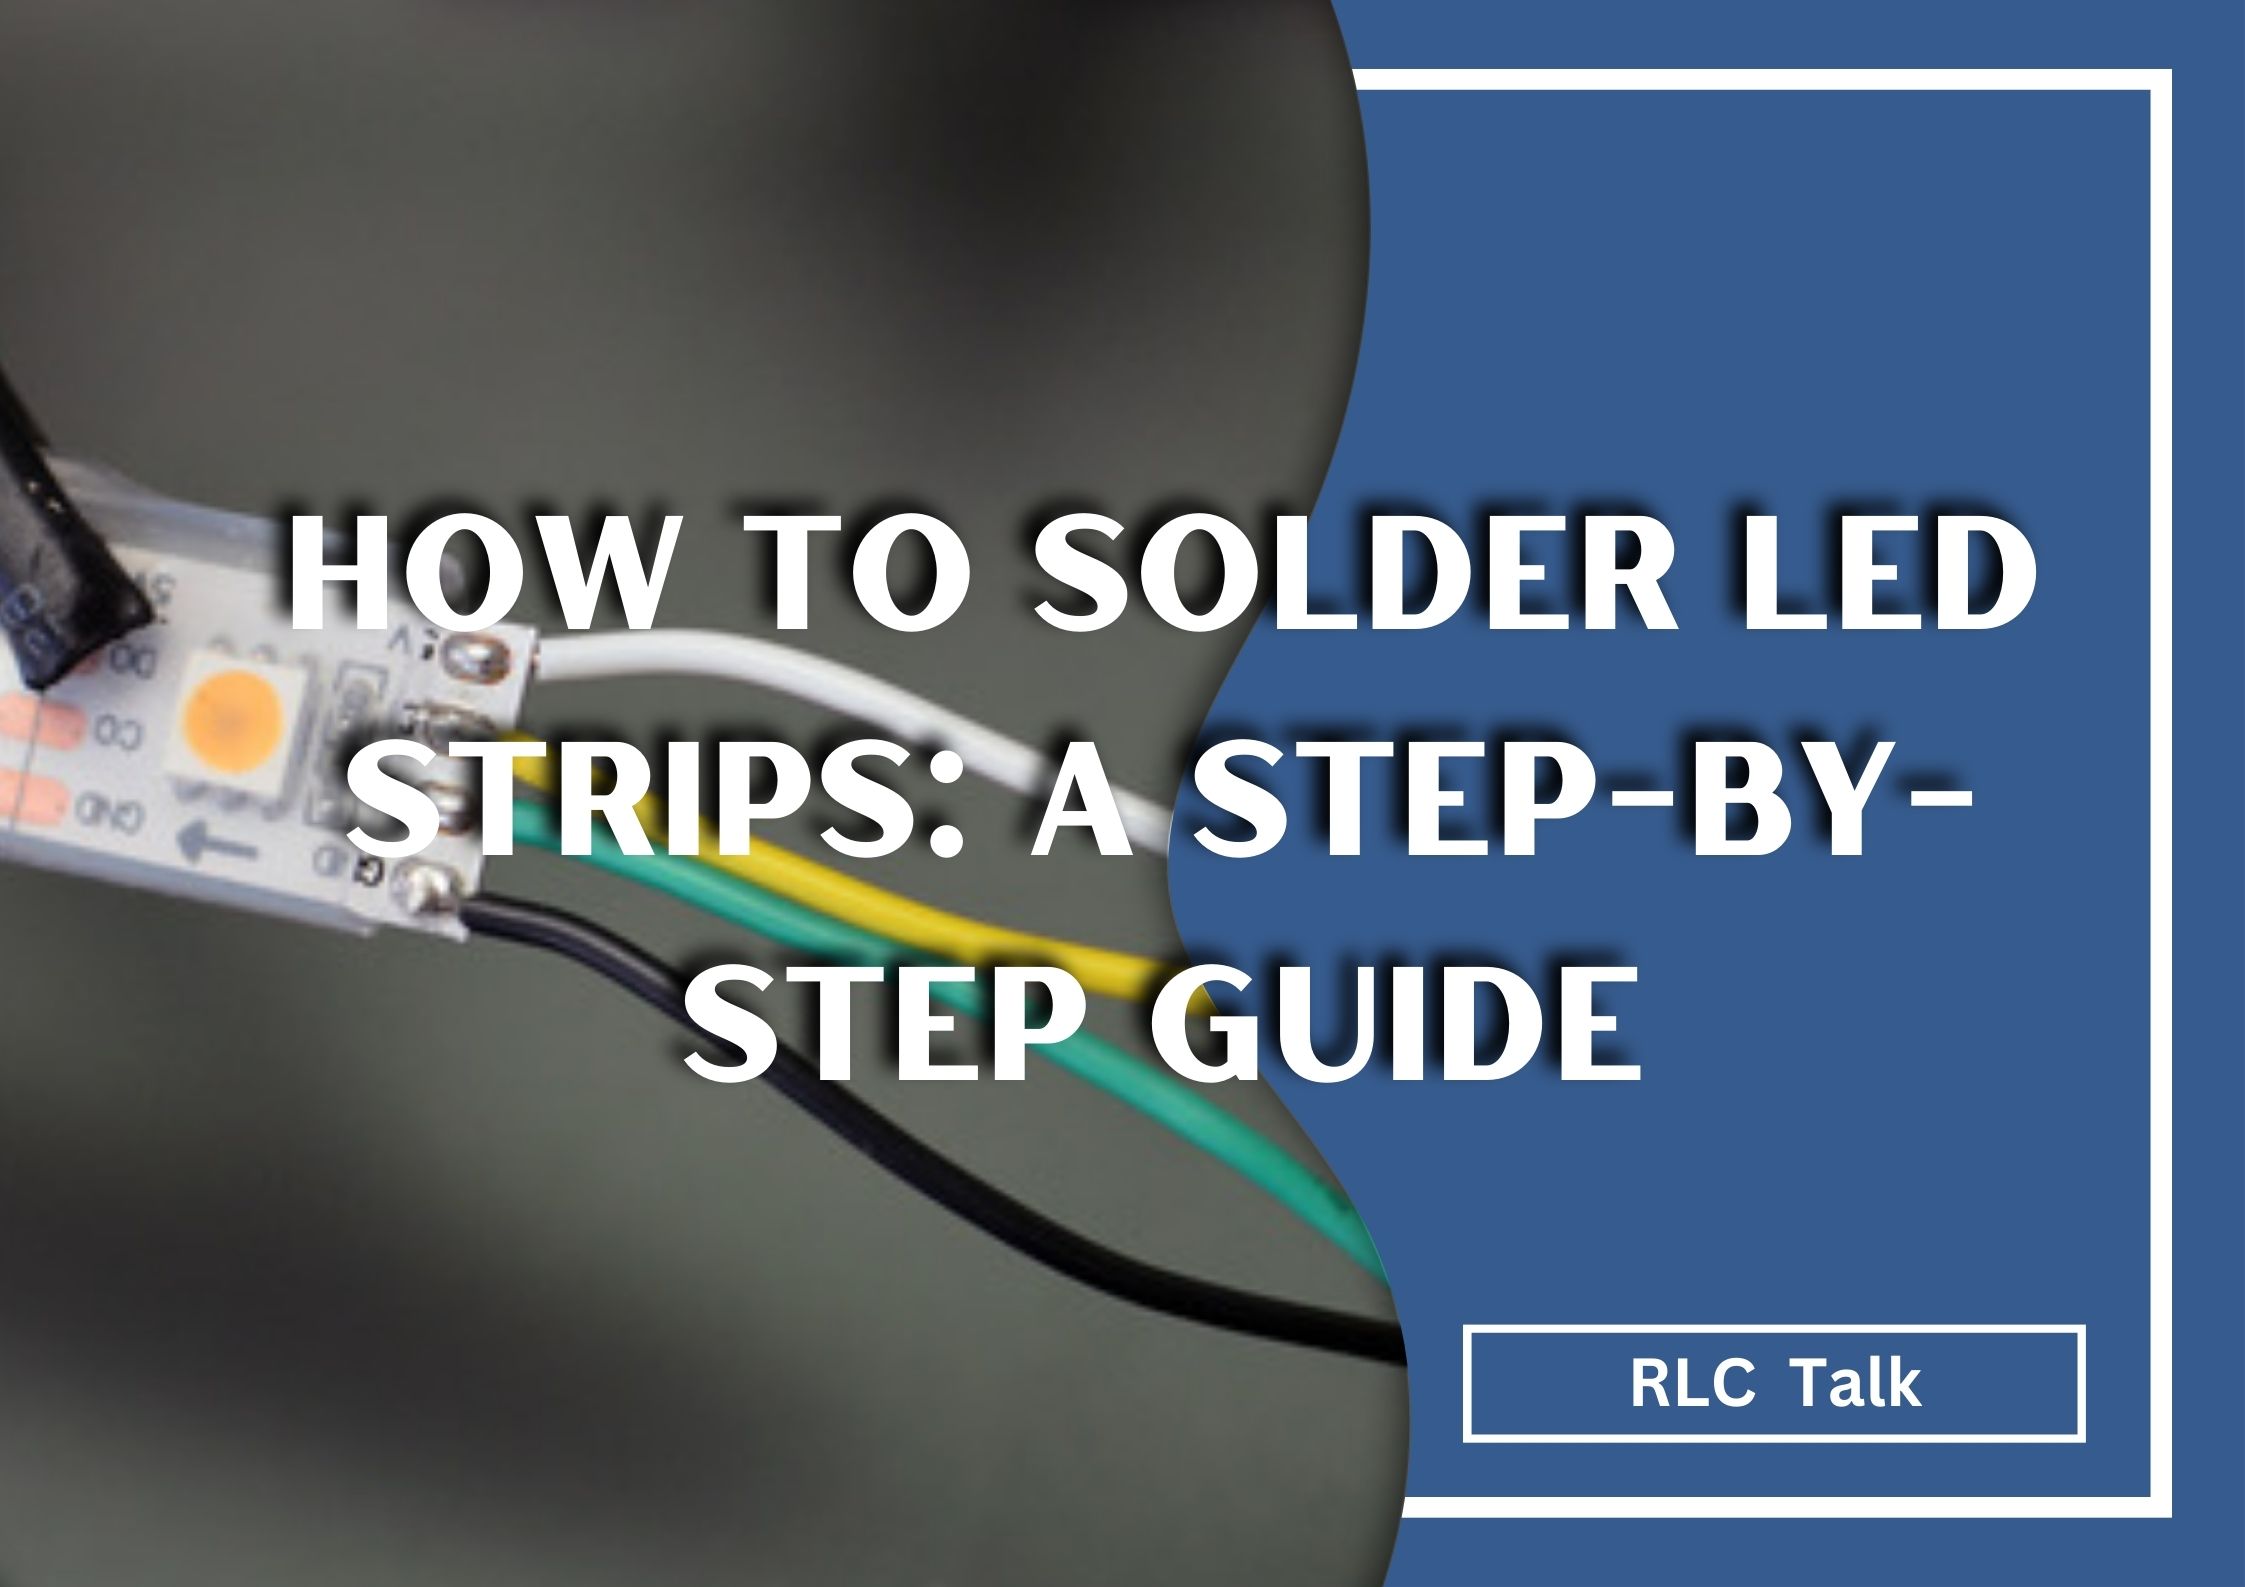 How to Solder LED Strips: A Step-by-Step Guide